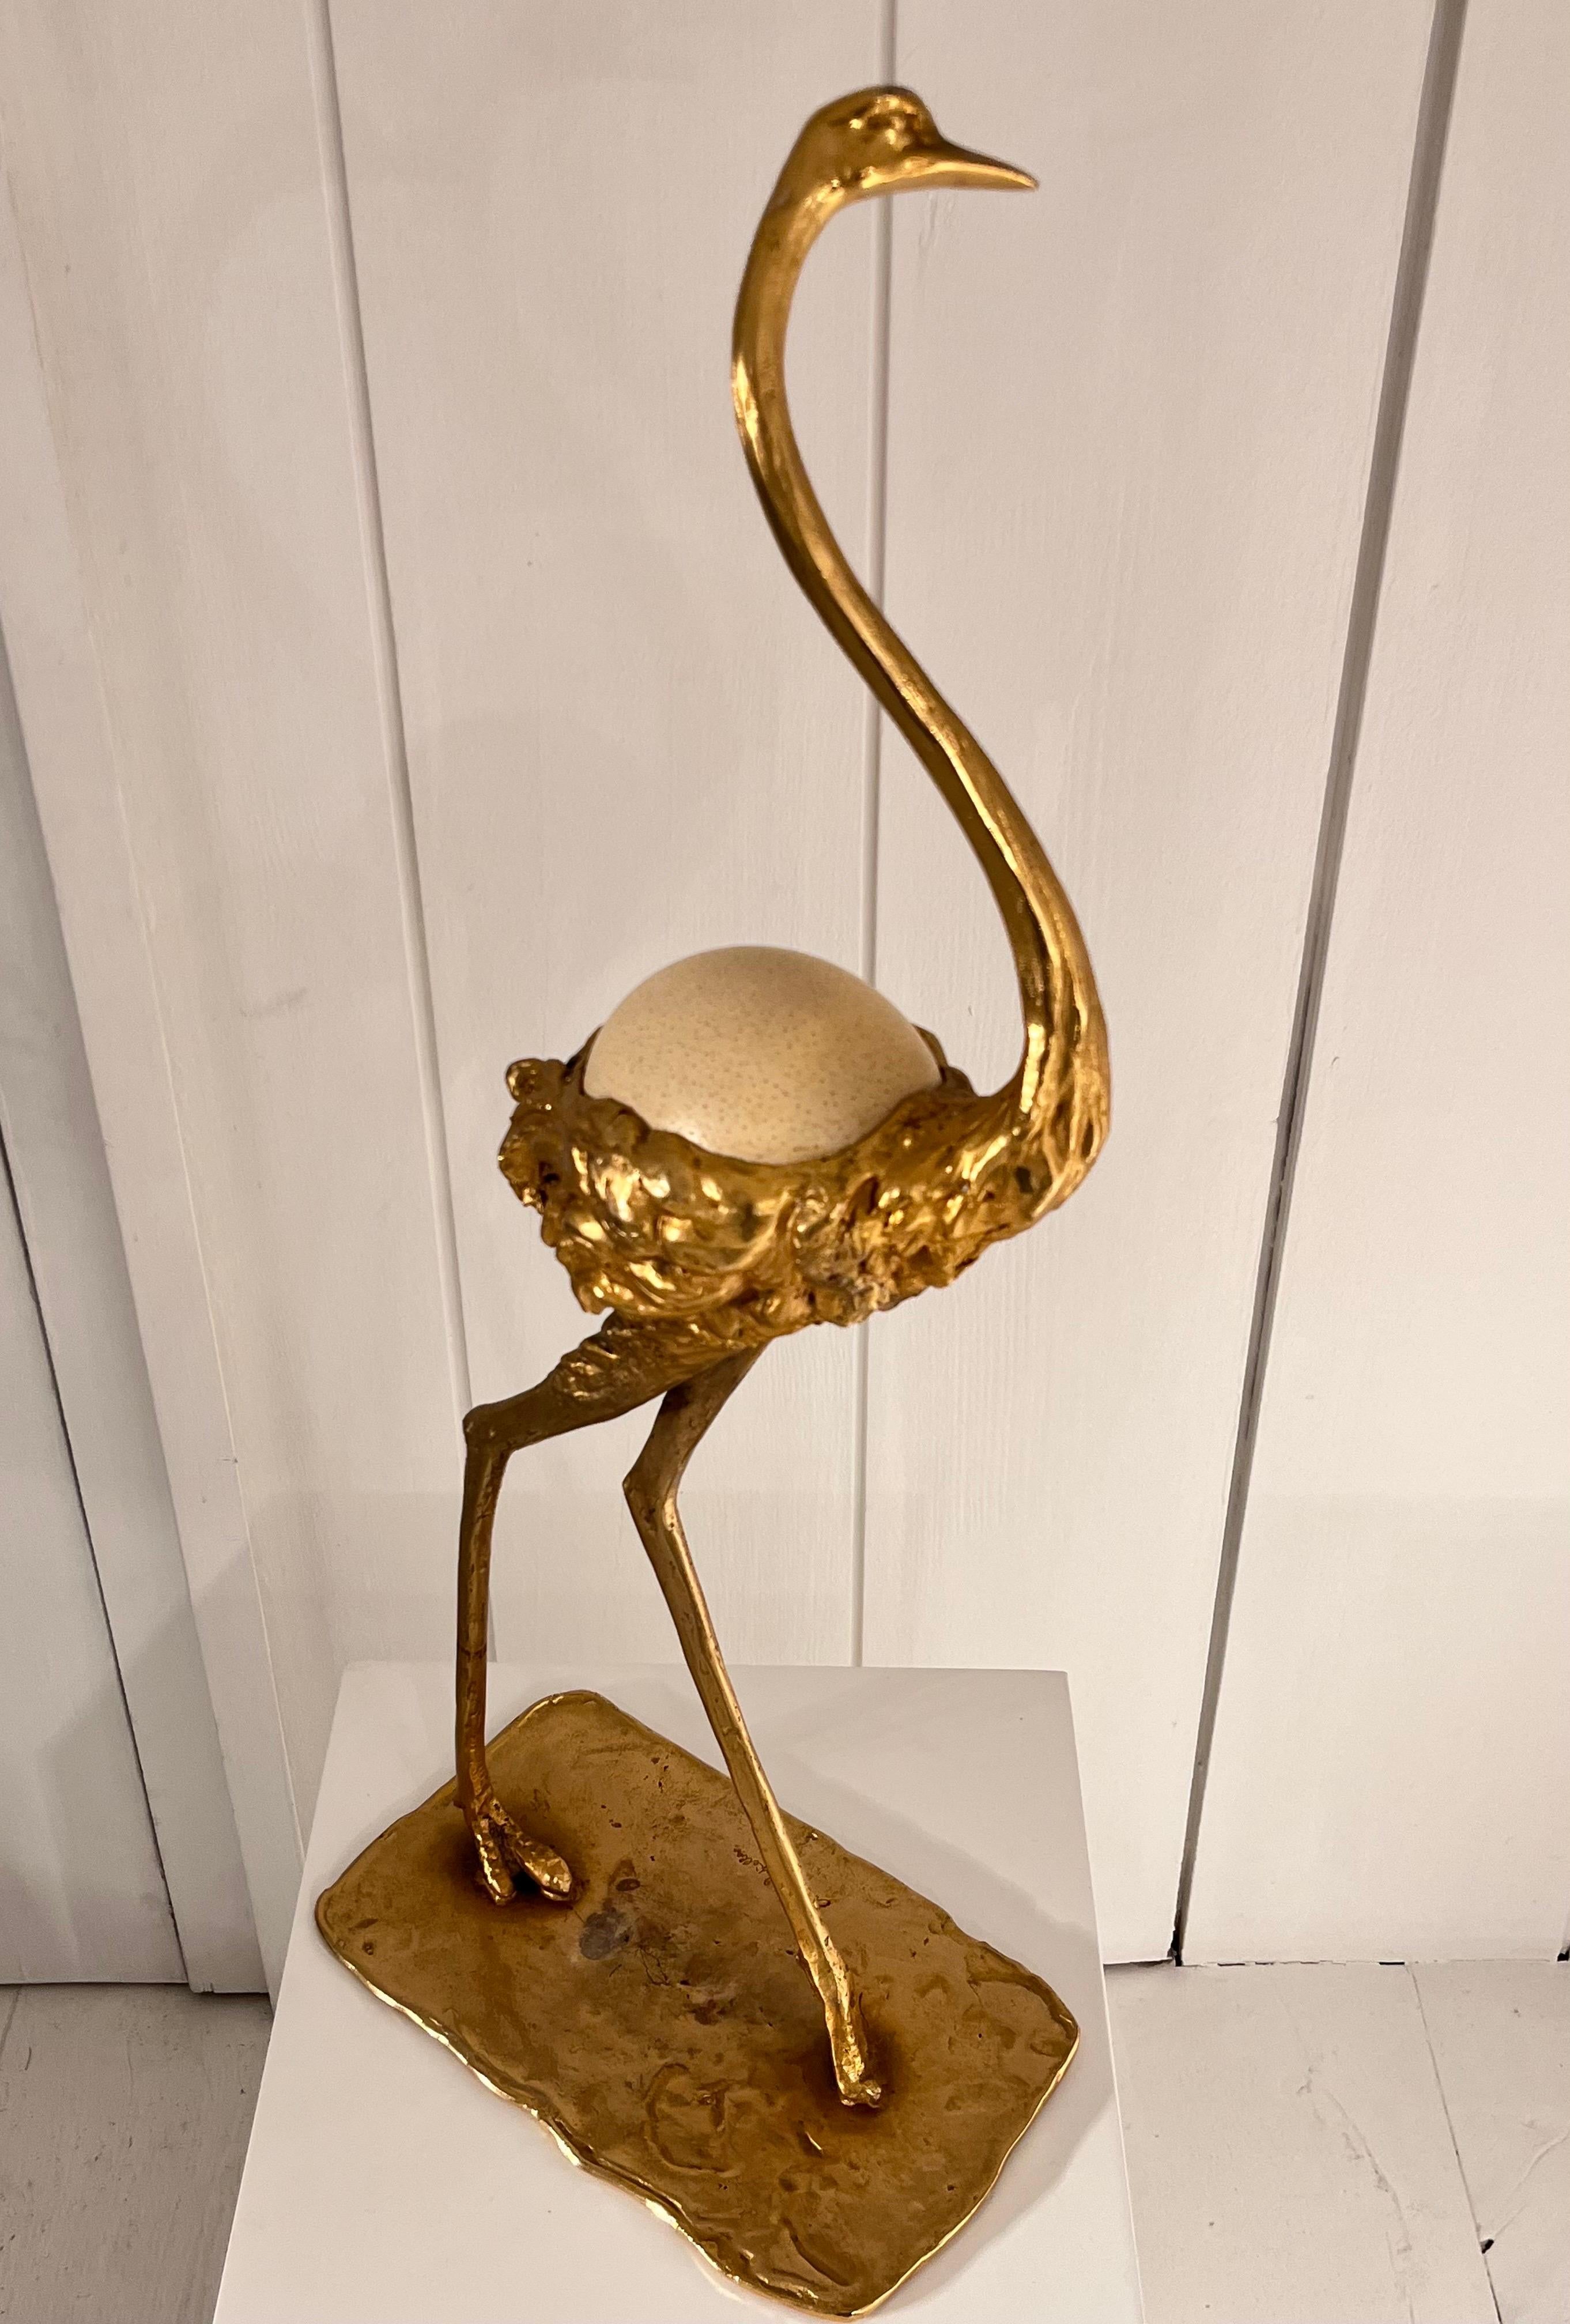 Airone sculpture
Gilt bronze, glass, resin ostrich egg 
Signed by the artist on the base
Circa 1973-1974
